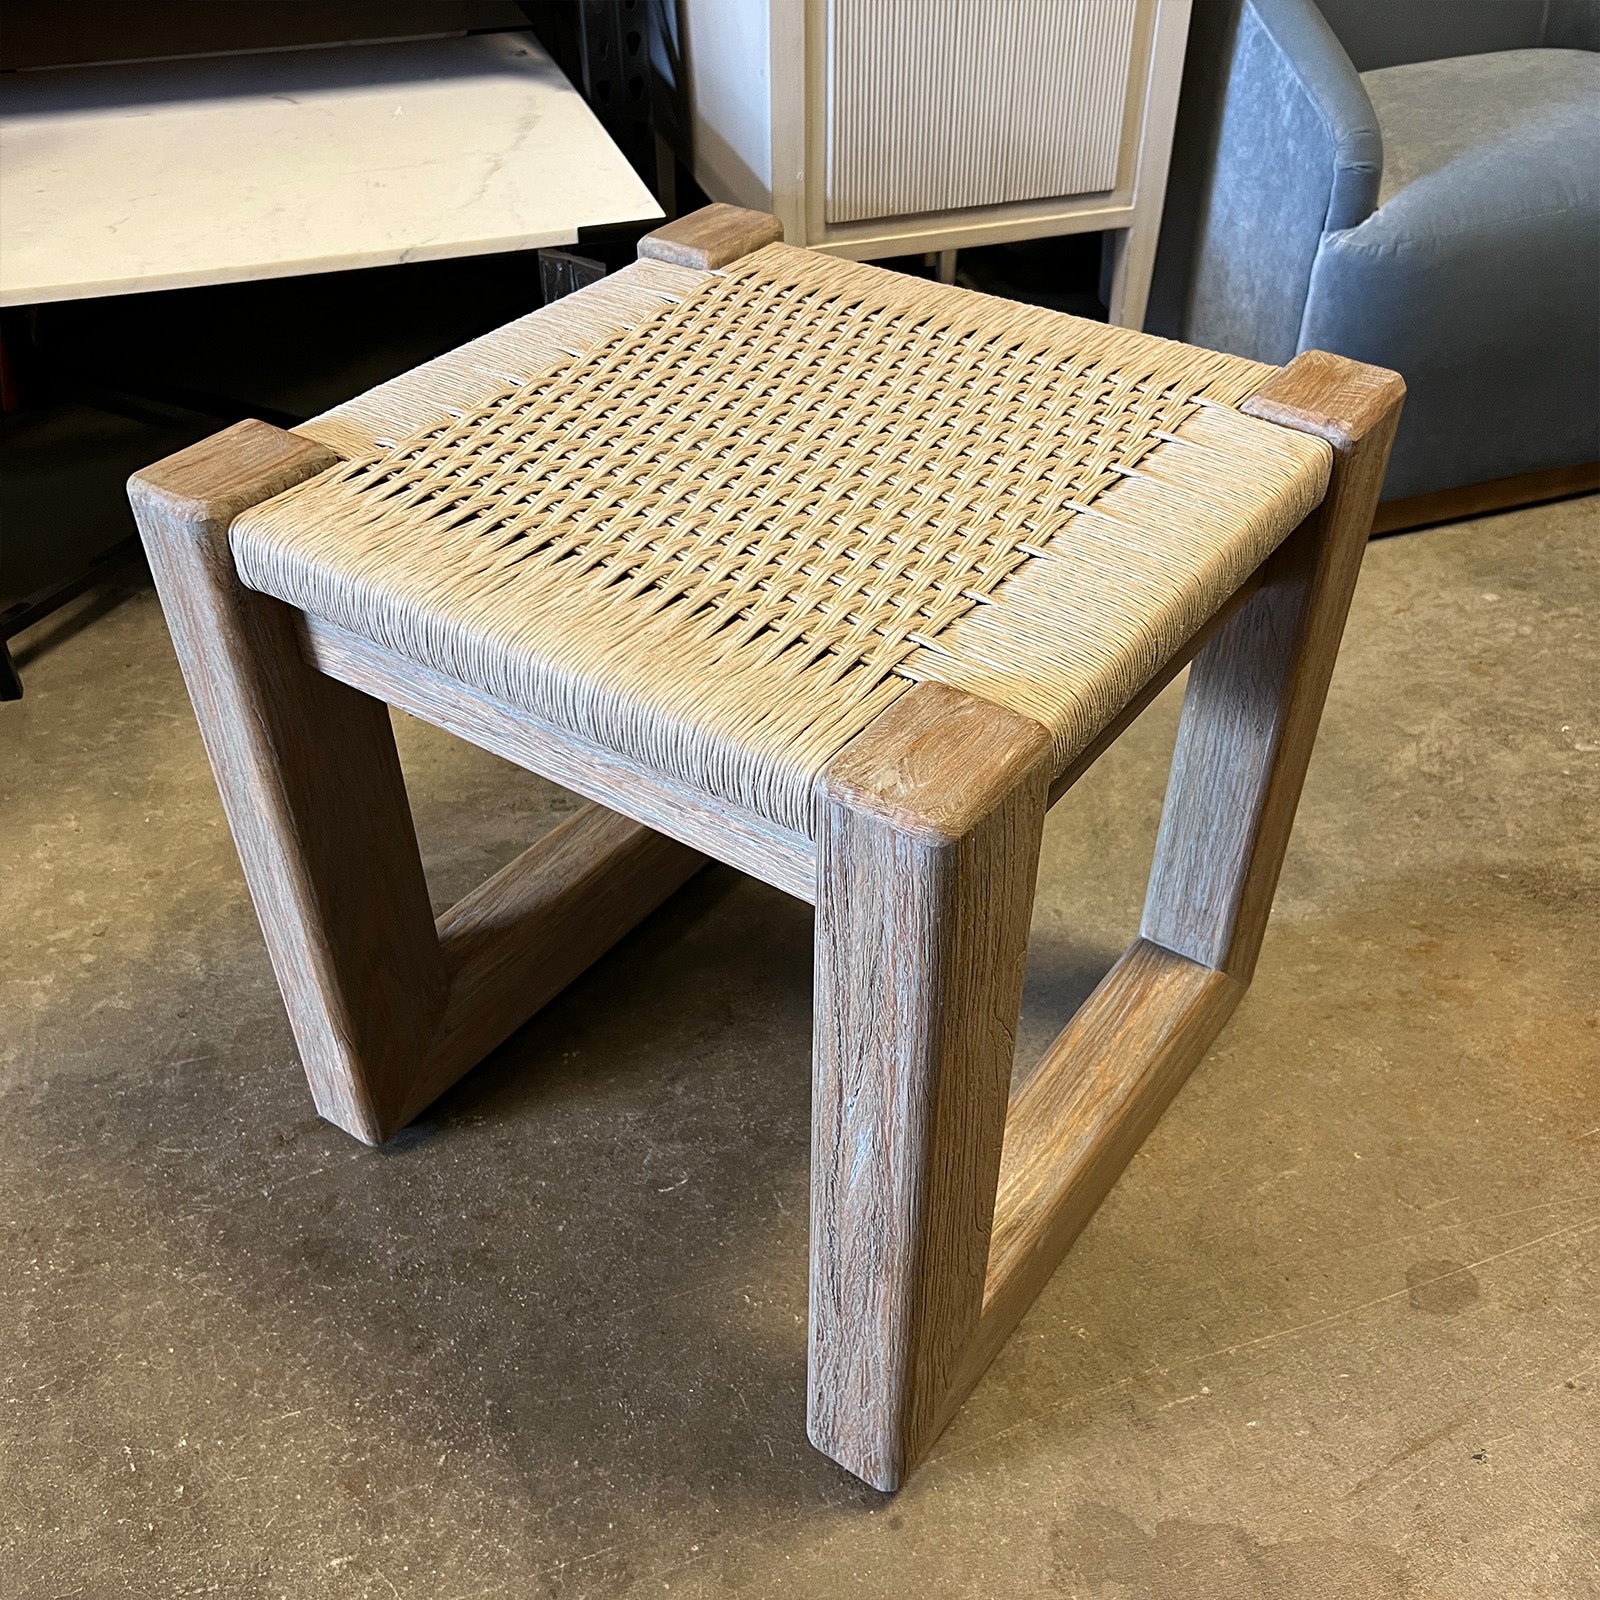 Bradley Outdoor End Table